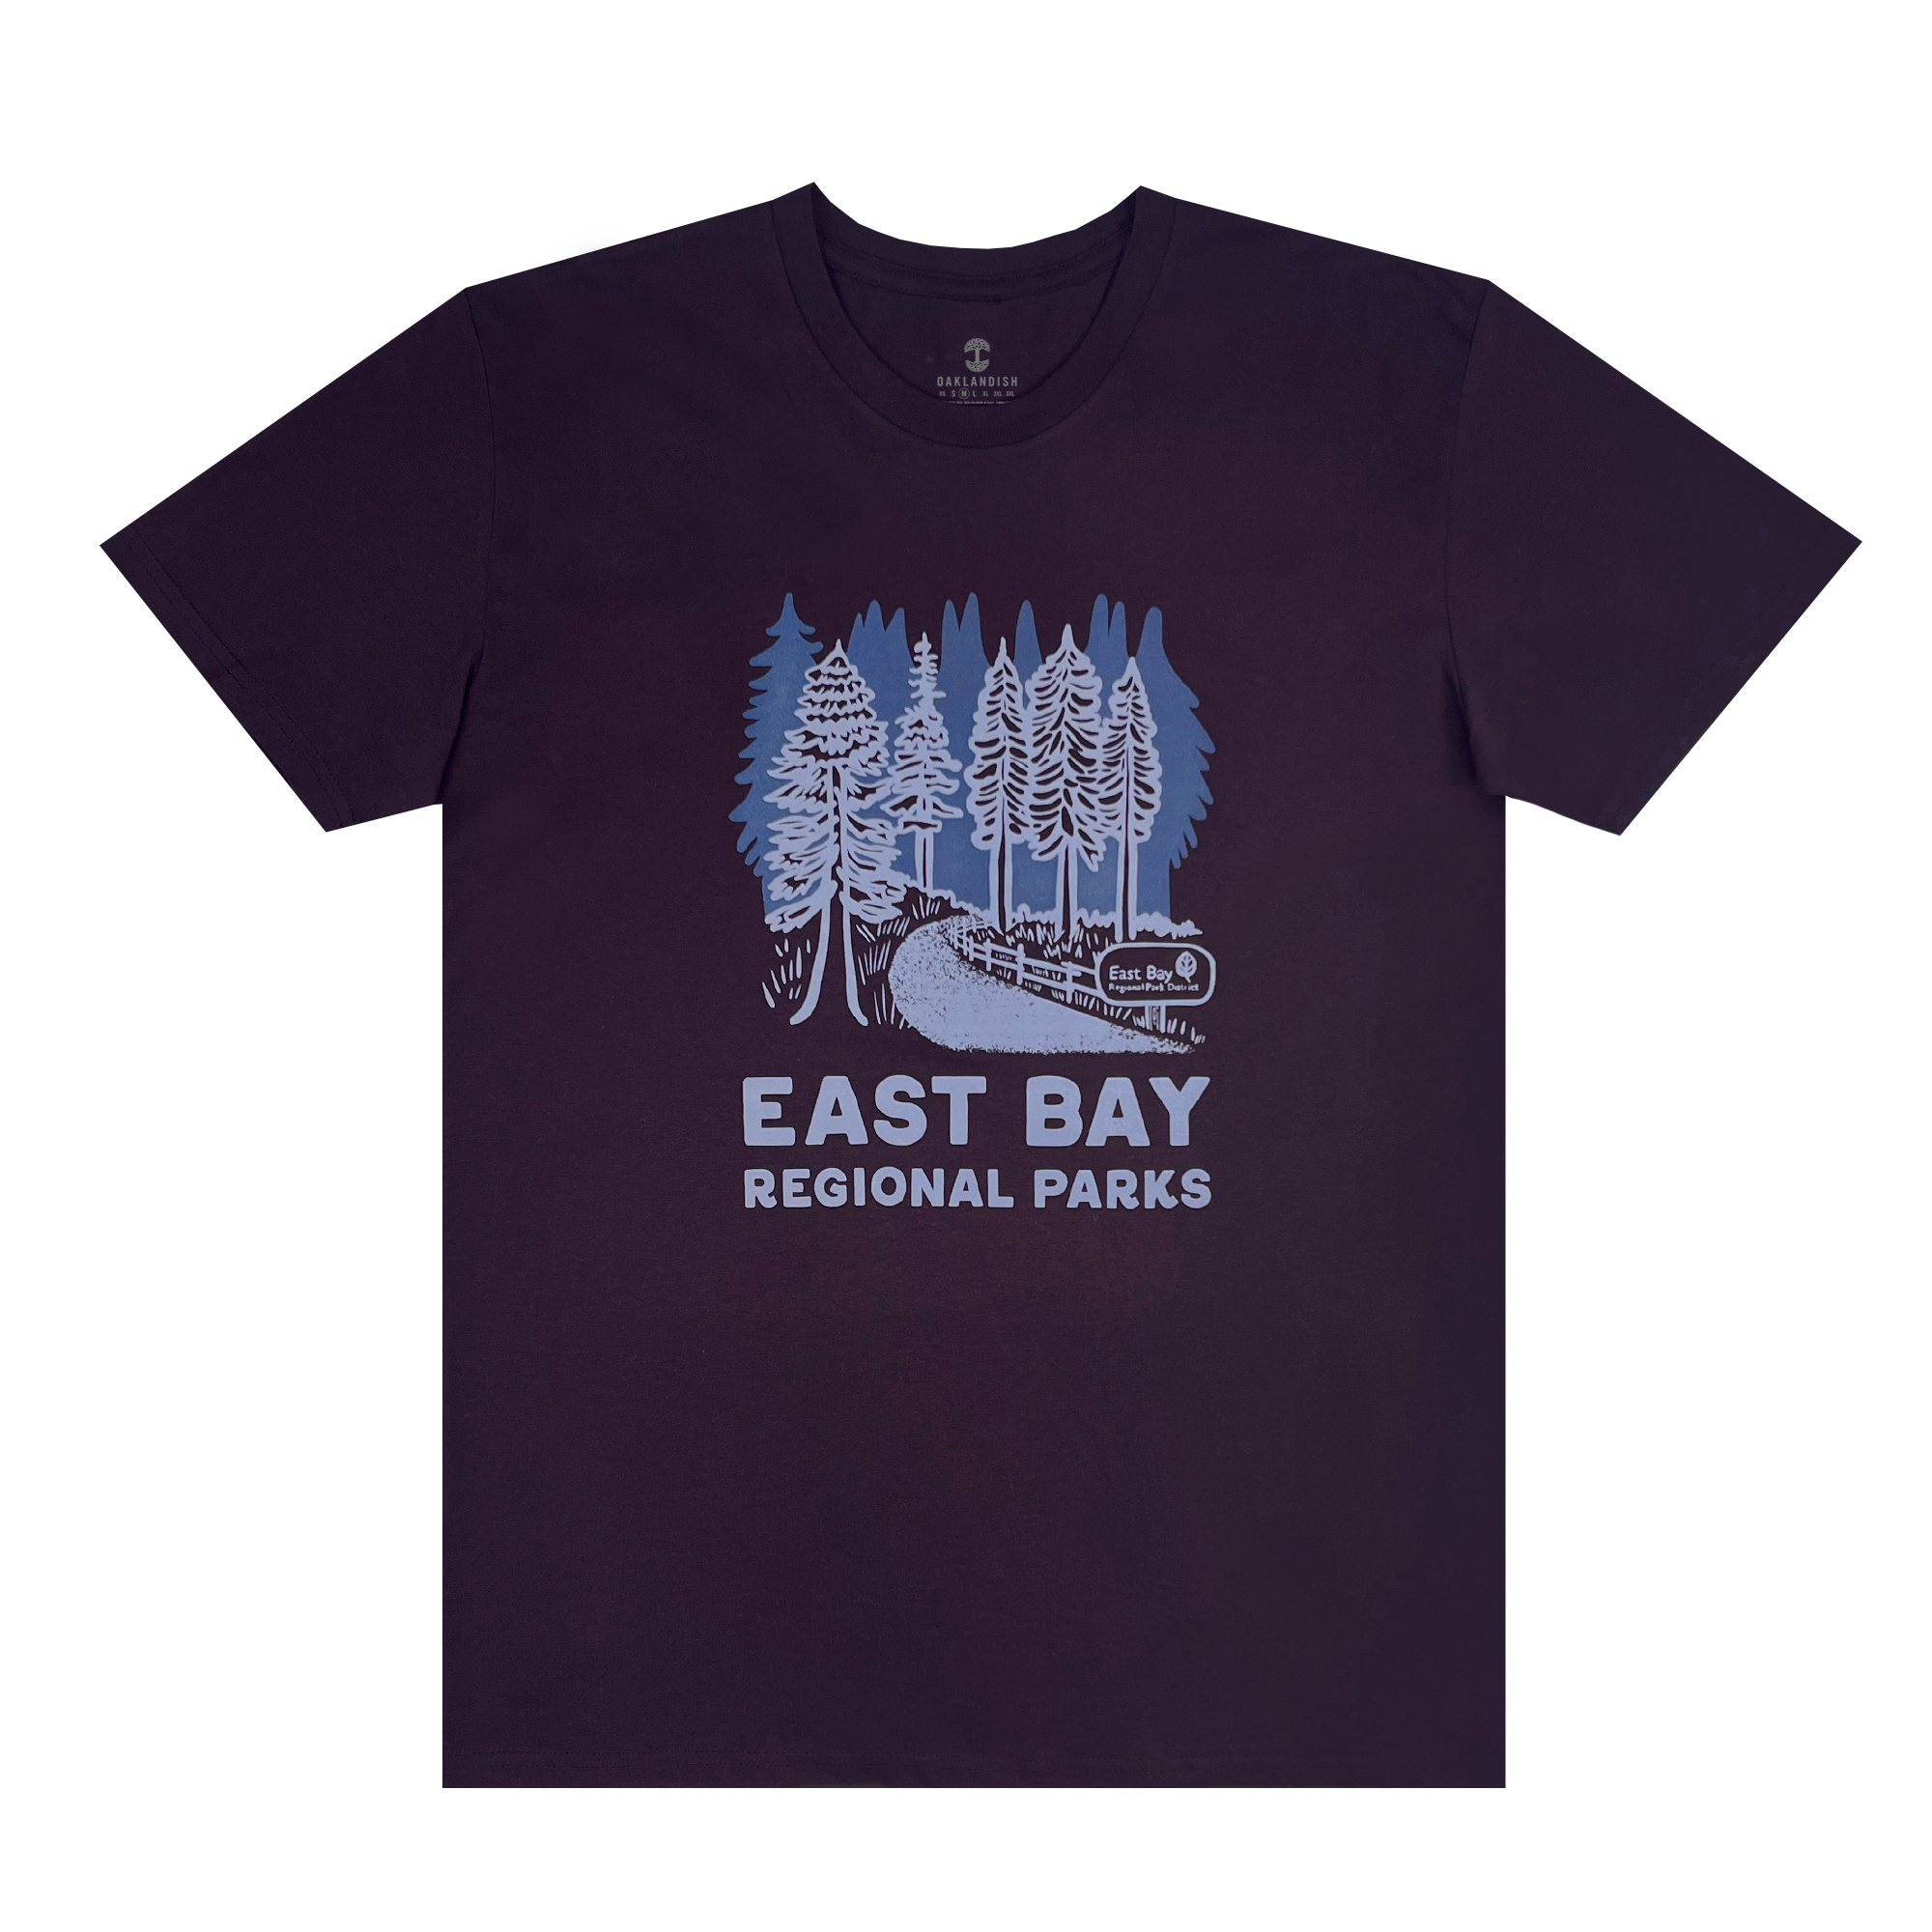 Front view of plum color cotton t-shirt with East Bay Regional Parks artwork.